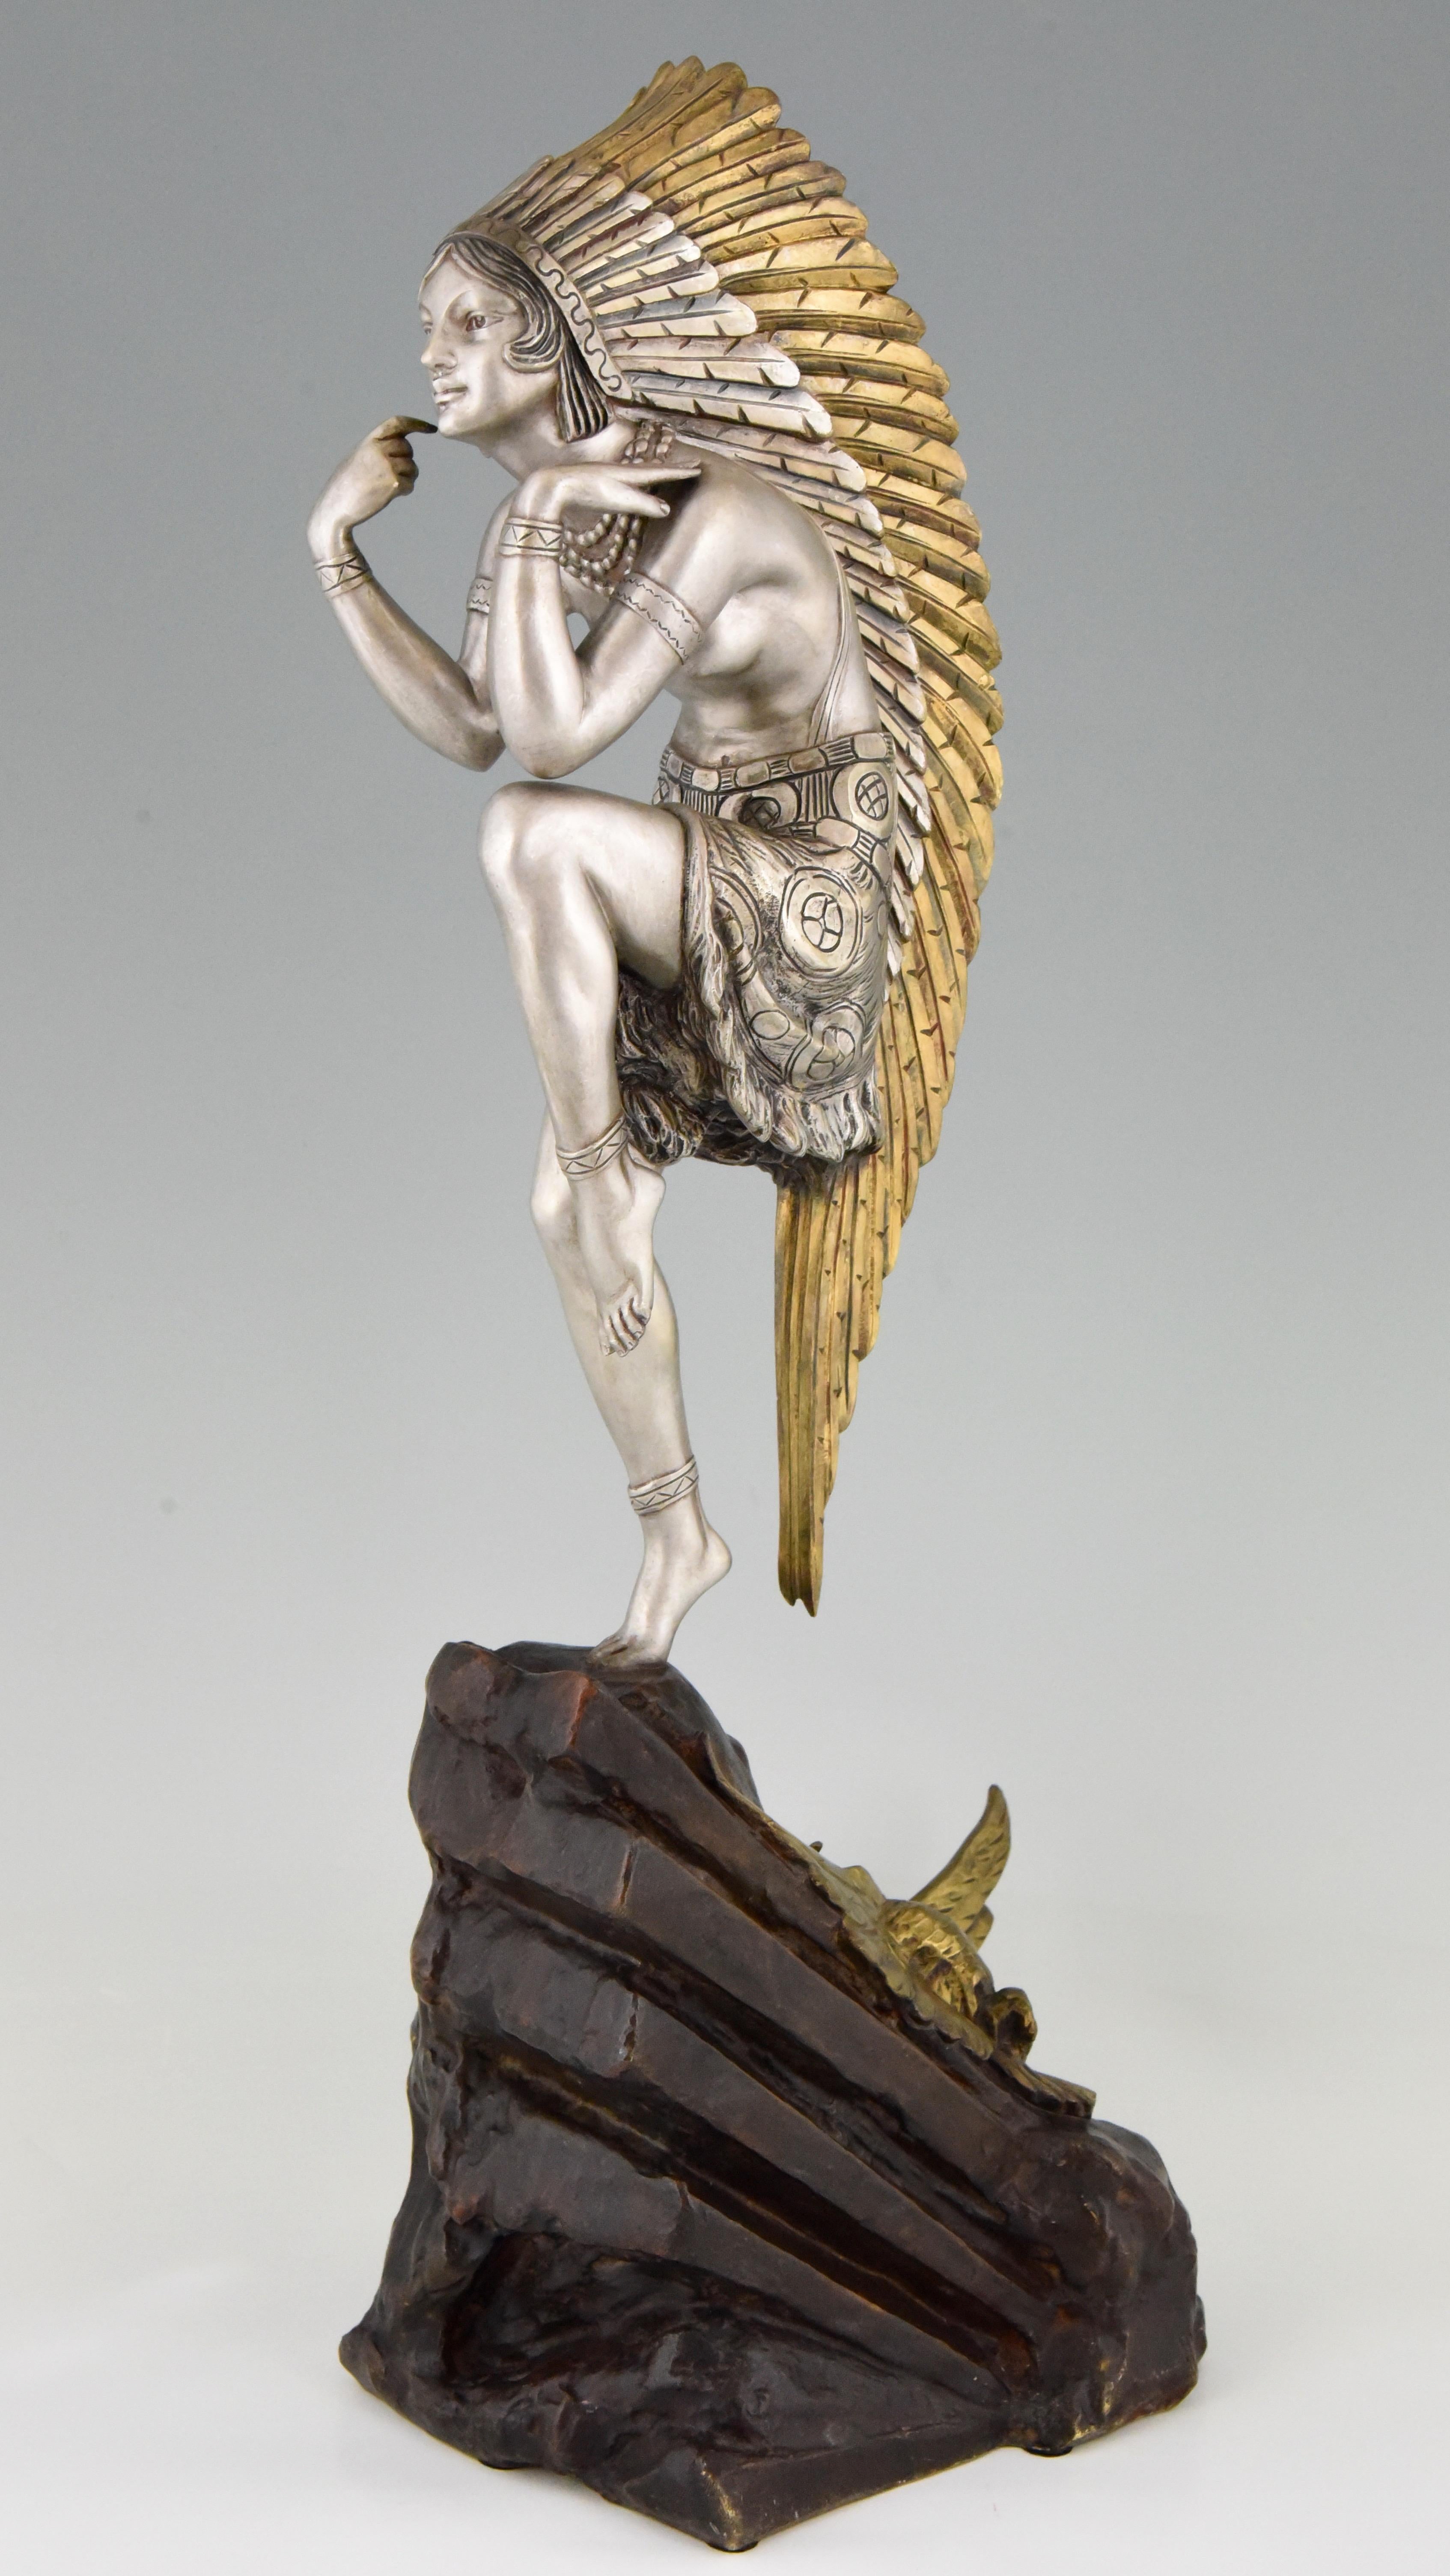 French Art Deco Bronze Sculpture Female Indian Dancer with Headdress by Marcel Bouraine